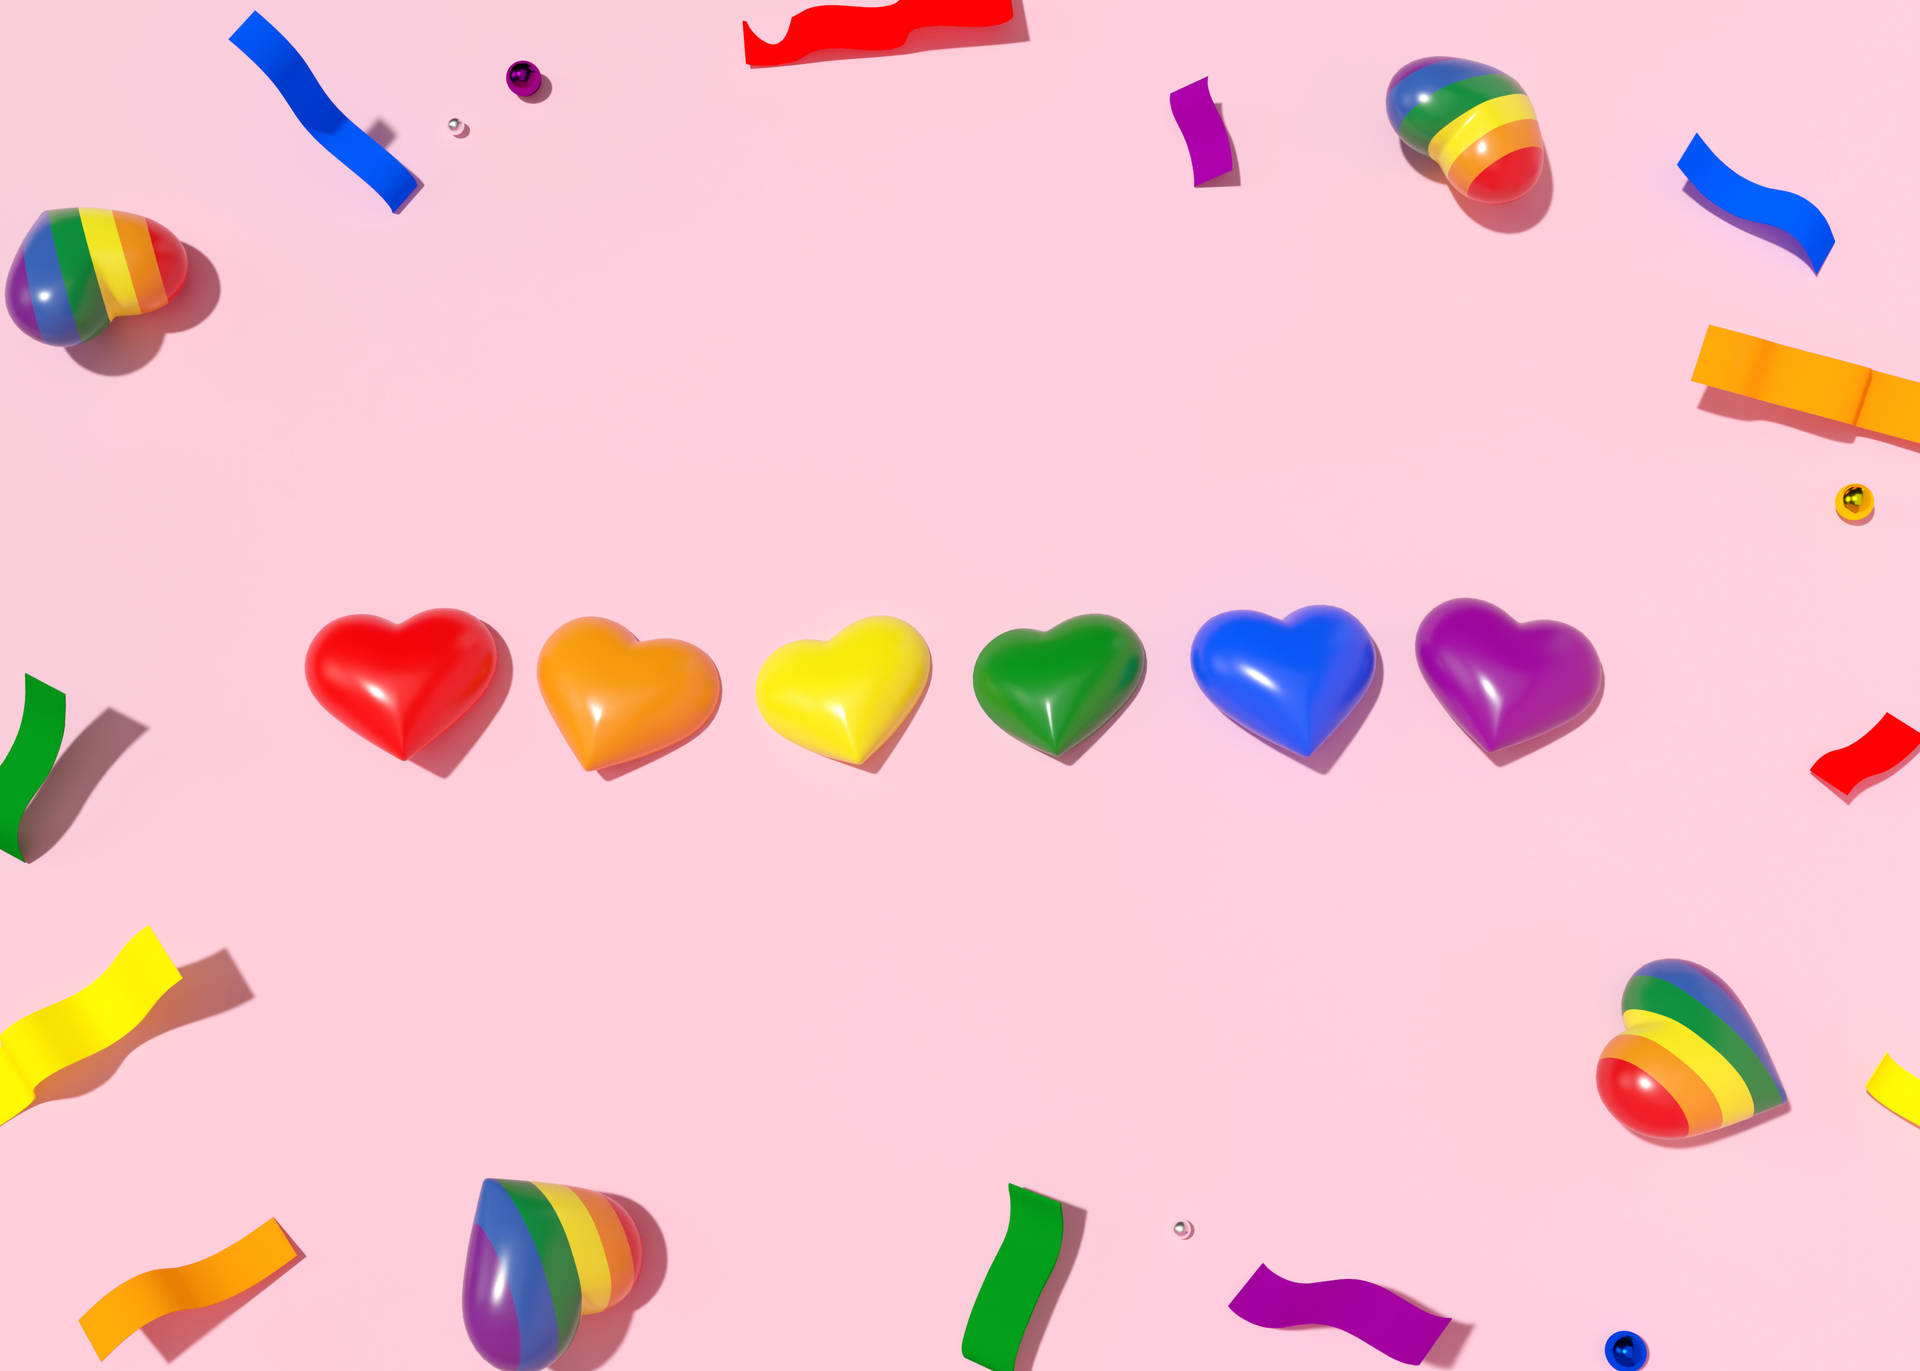 Rainbow-colored Aesthetic Heart Shapes